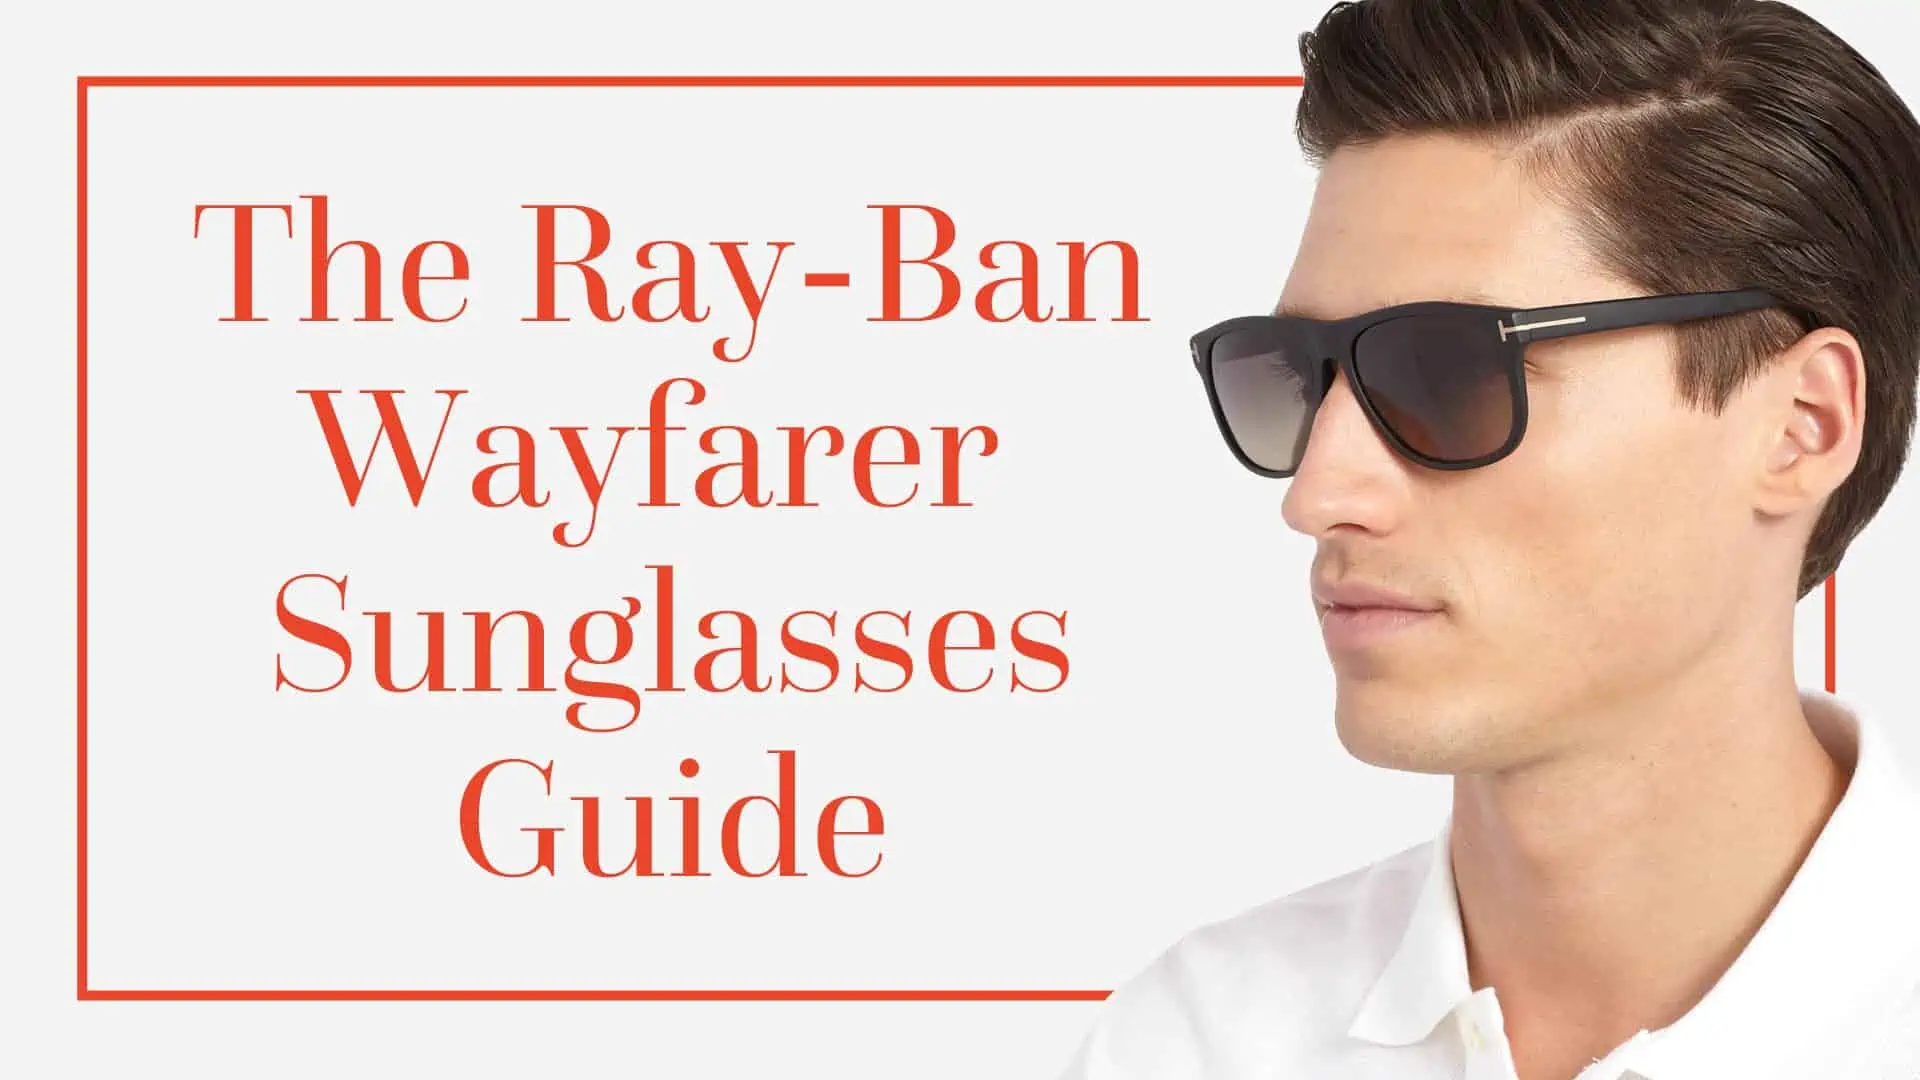 Ray Ban Sunglasses - History and Brand Guide